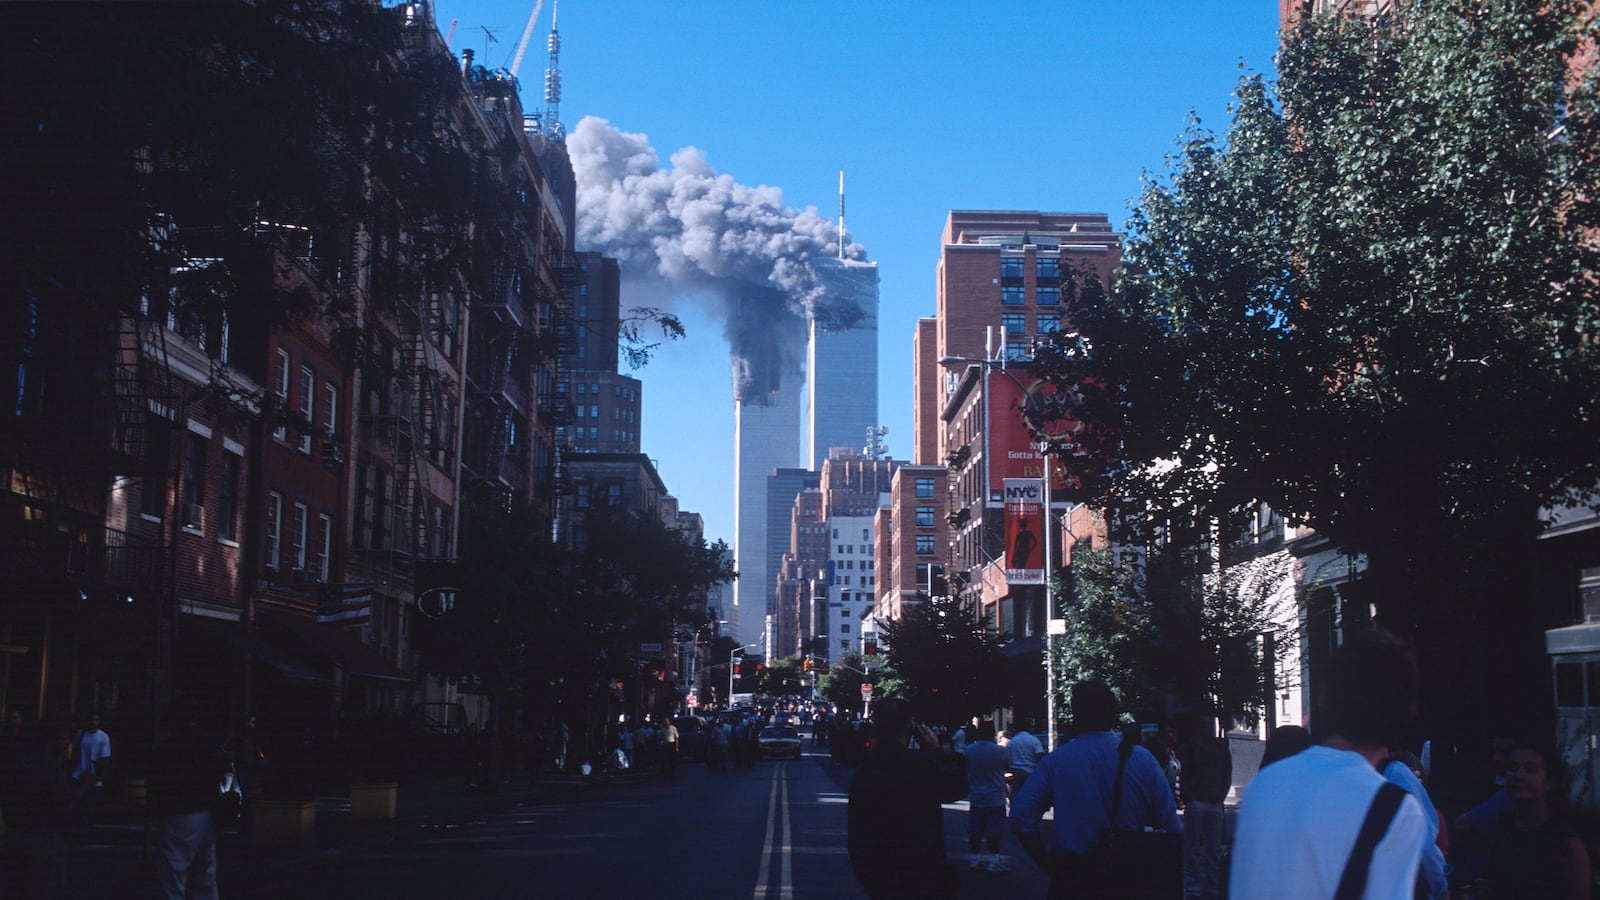 People look on as smoke from the burning World Trade Center towers fills up the downtown Manhattan skyline after both buildings were attacked by airplanes on September 11, 2001 in New York City.